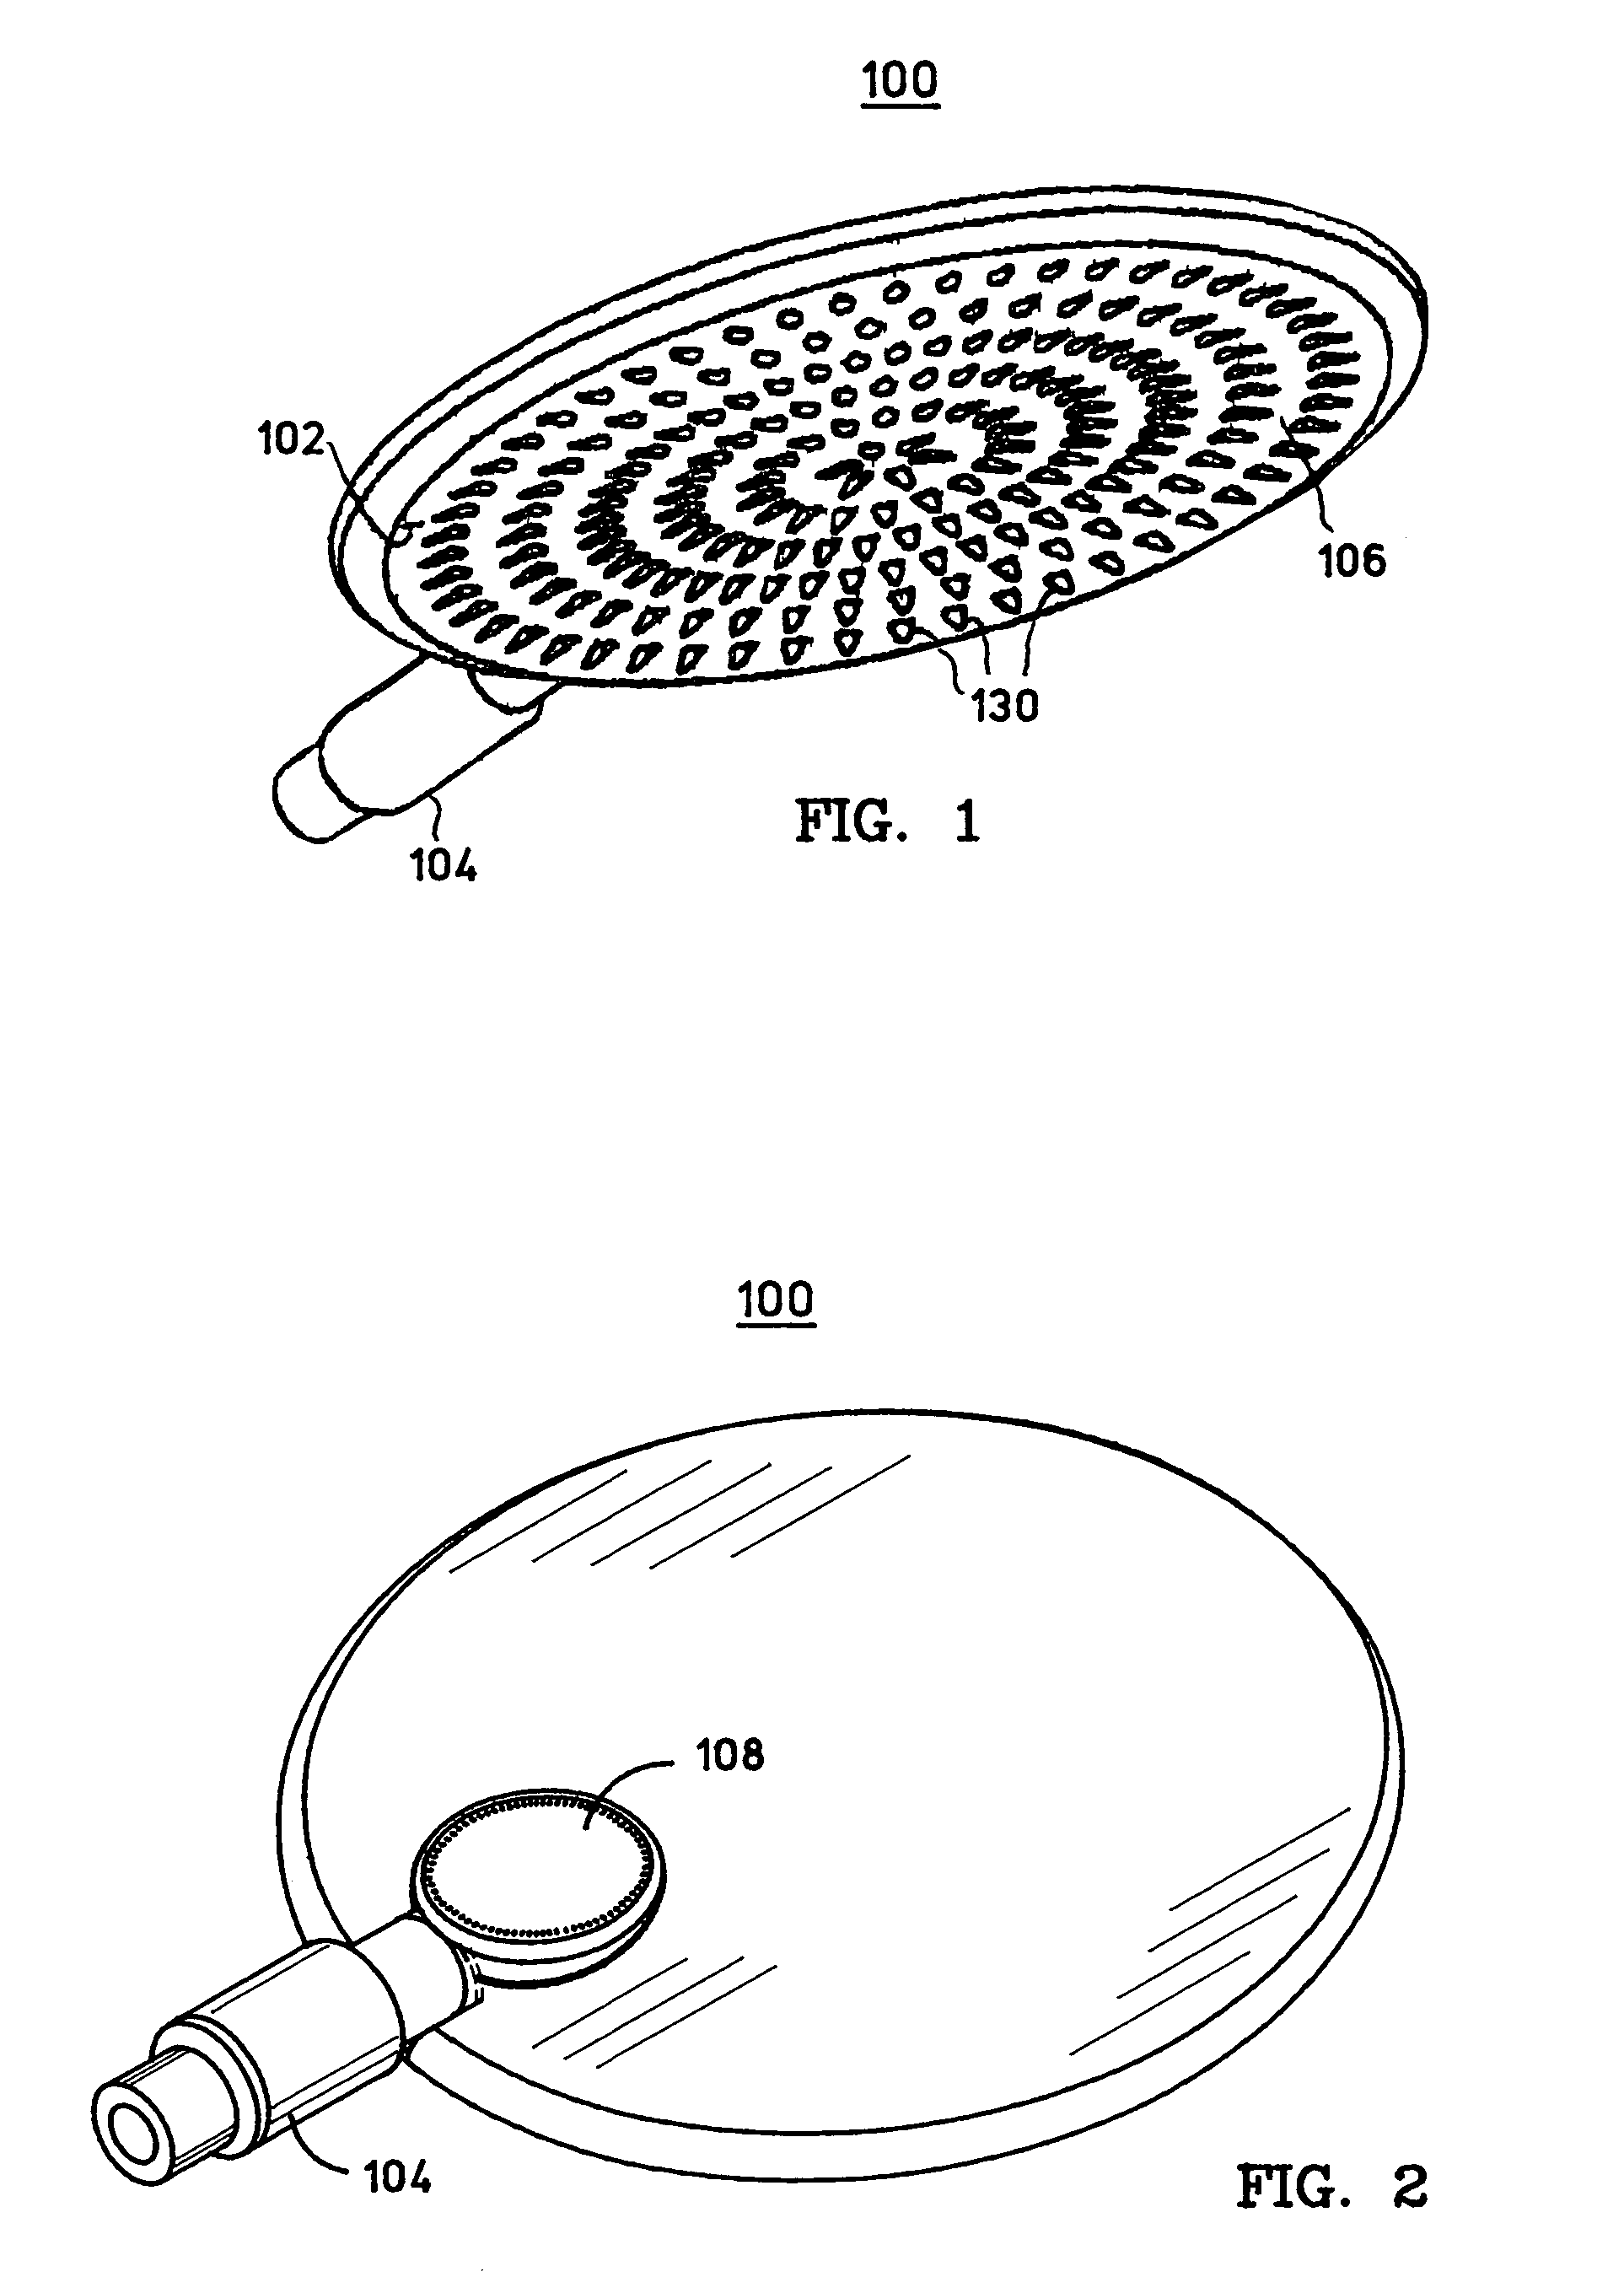 Showerhead with grooved water release ducts